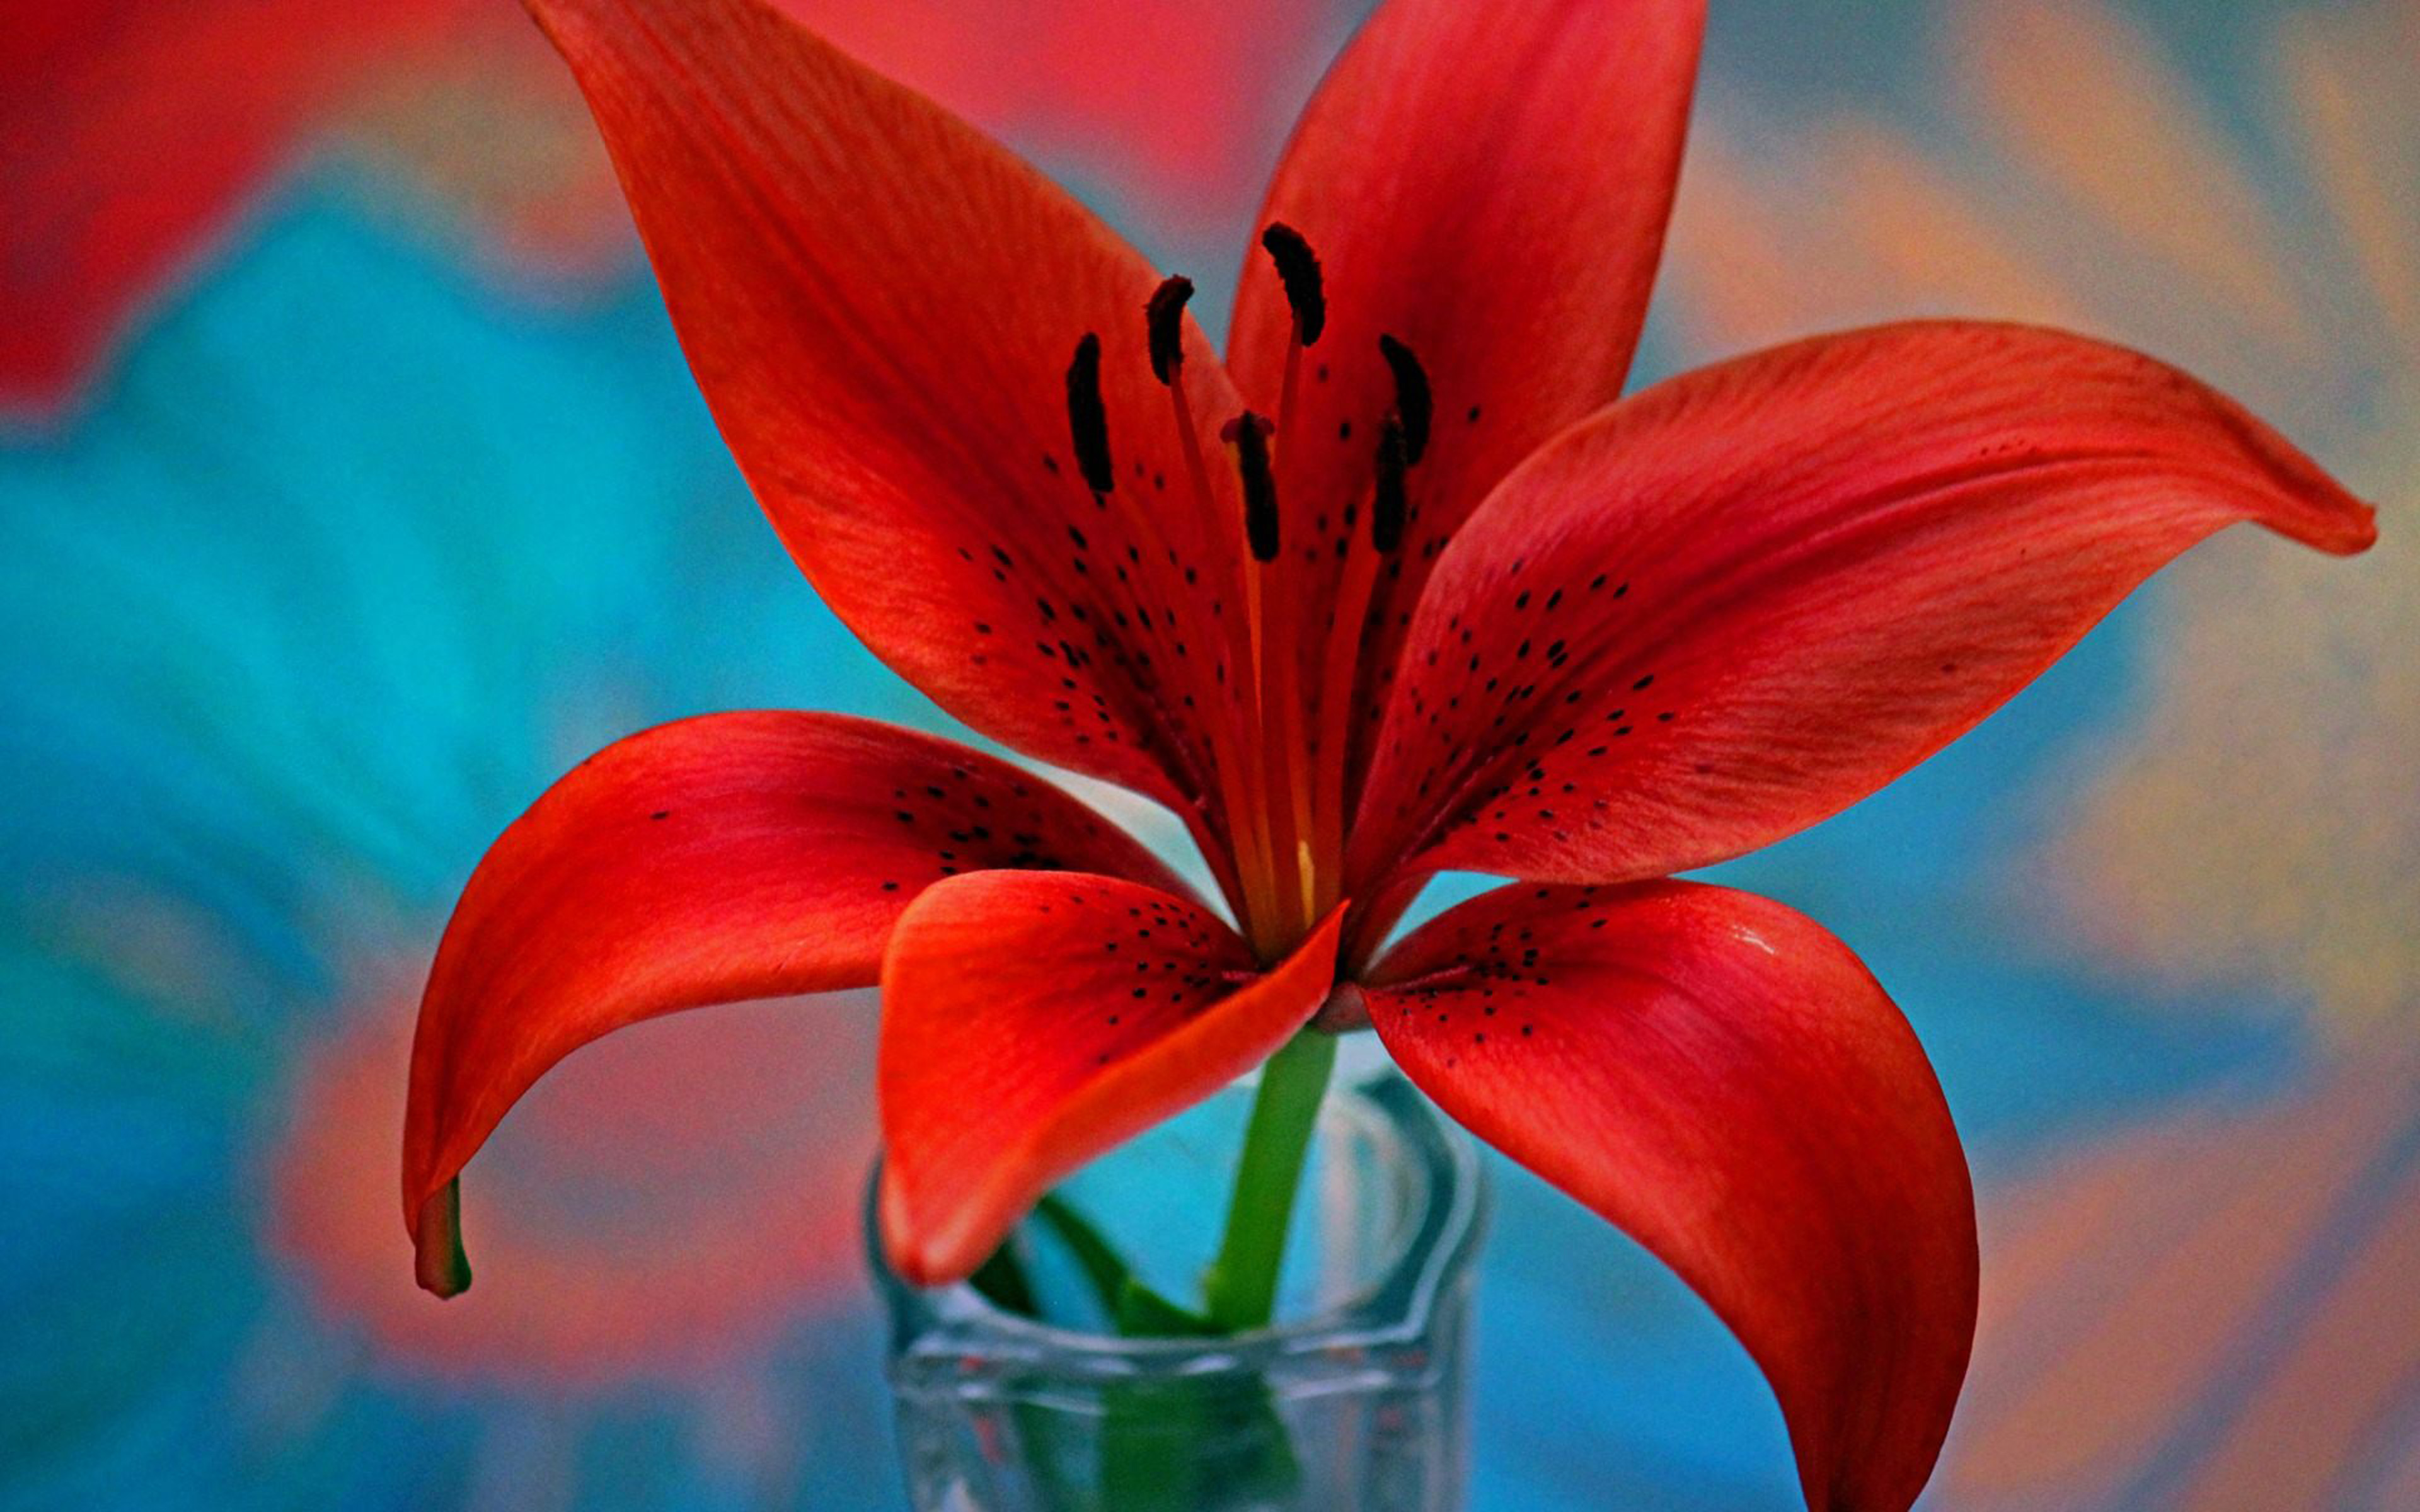 Red Lily Flower Wallpaper For Desktop Hd 3840x2400 : Wallpapers13.com